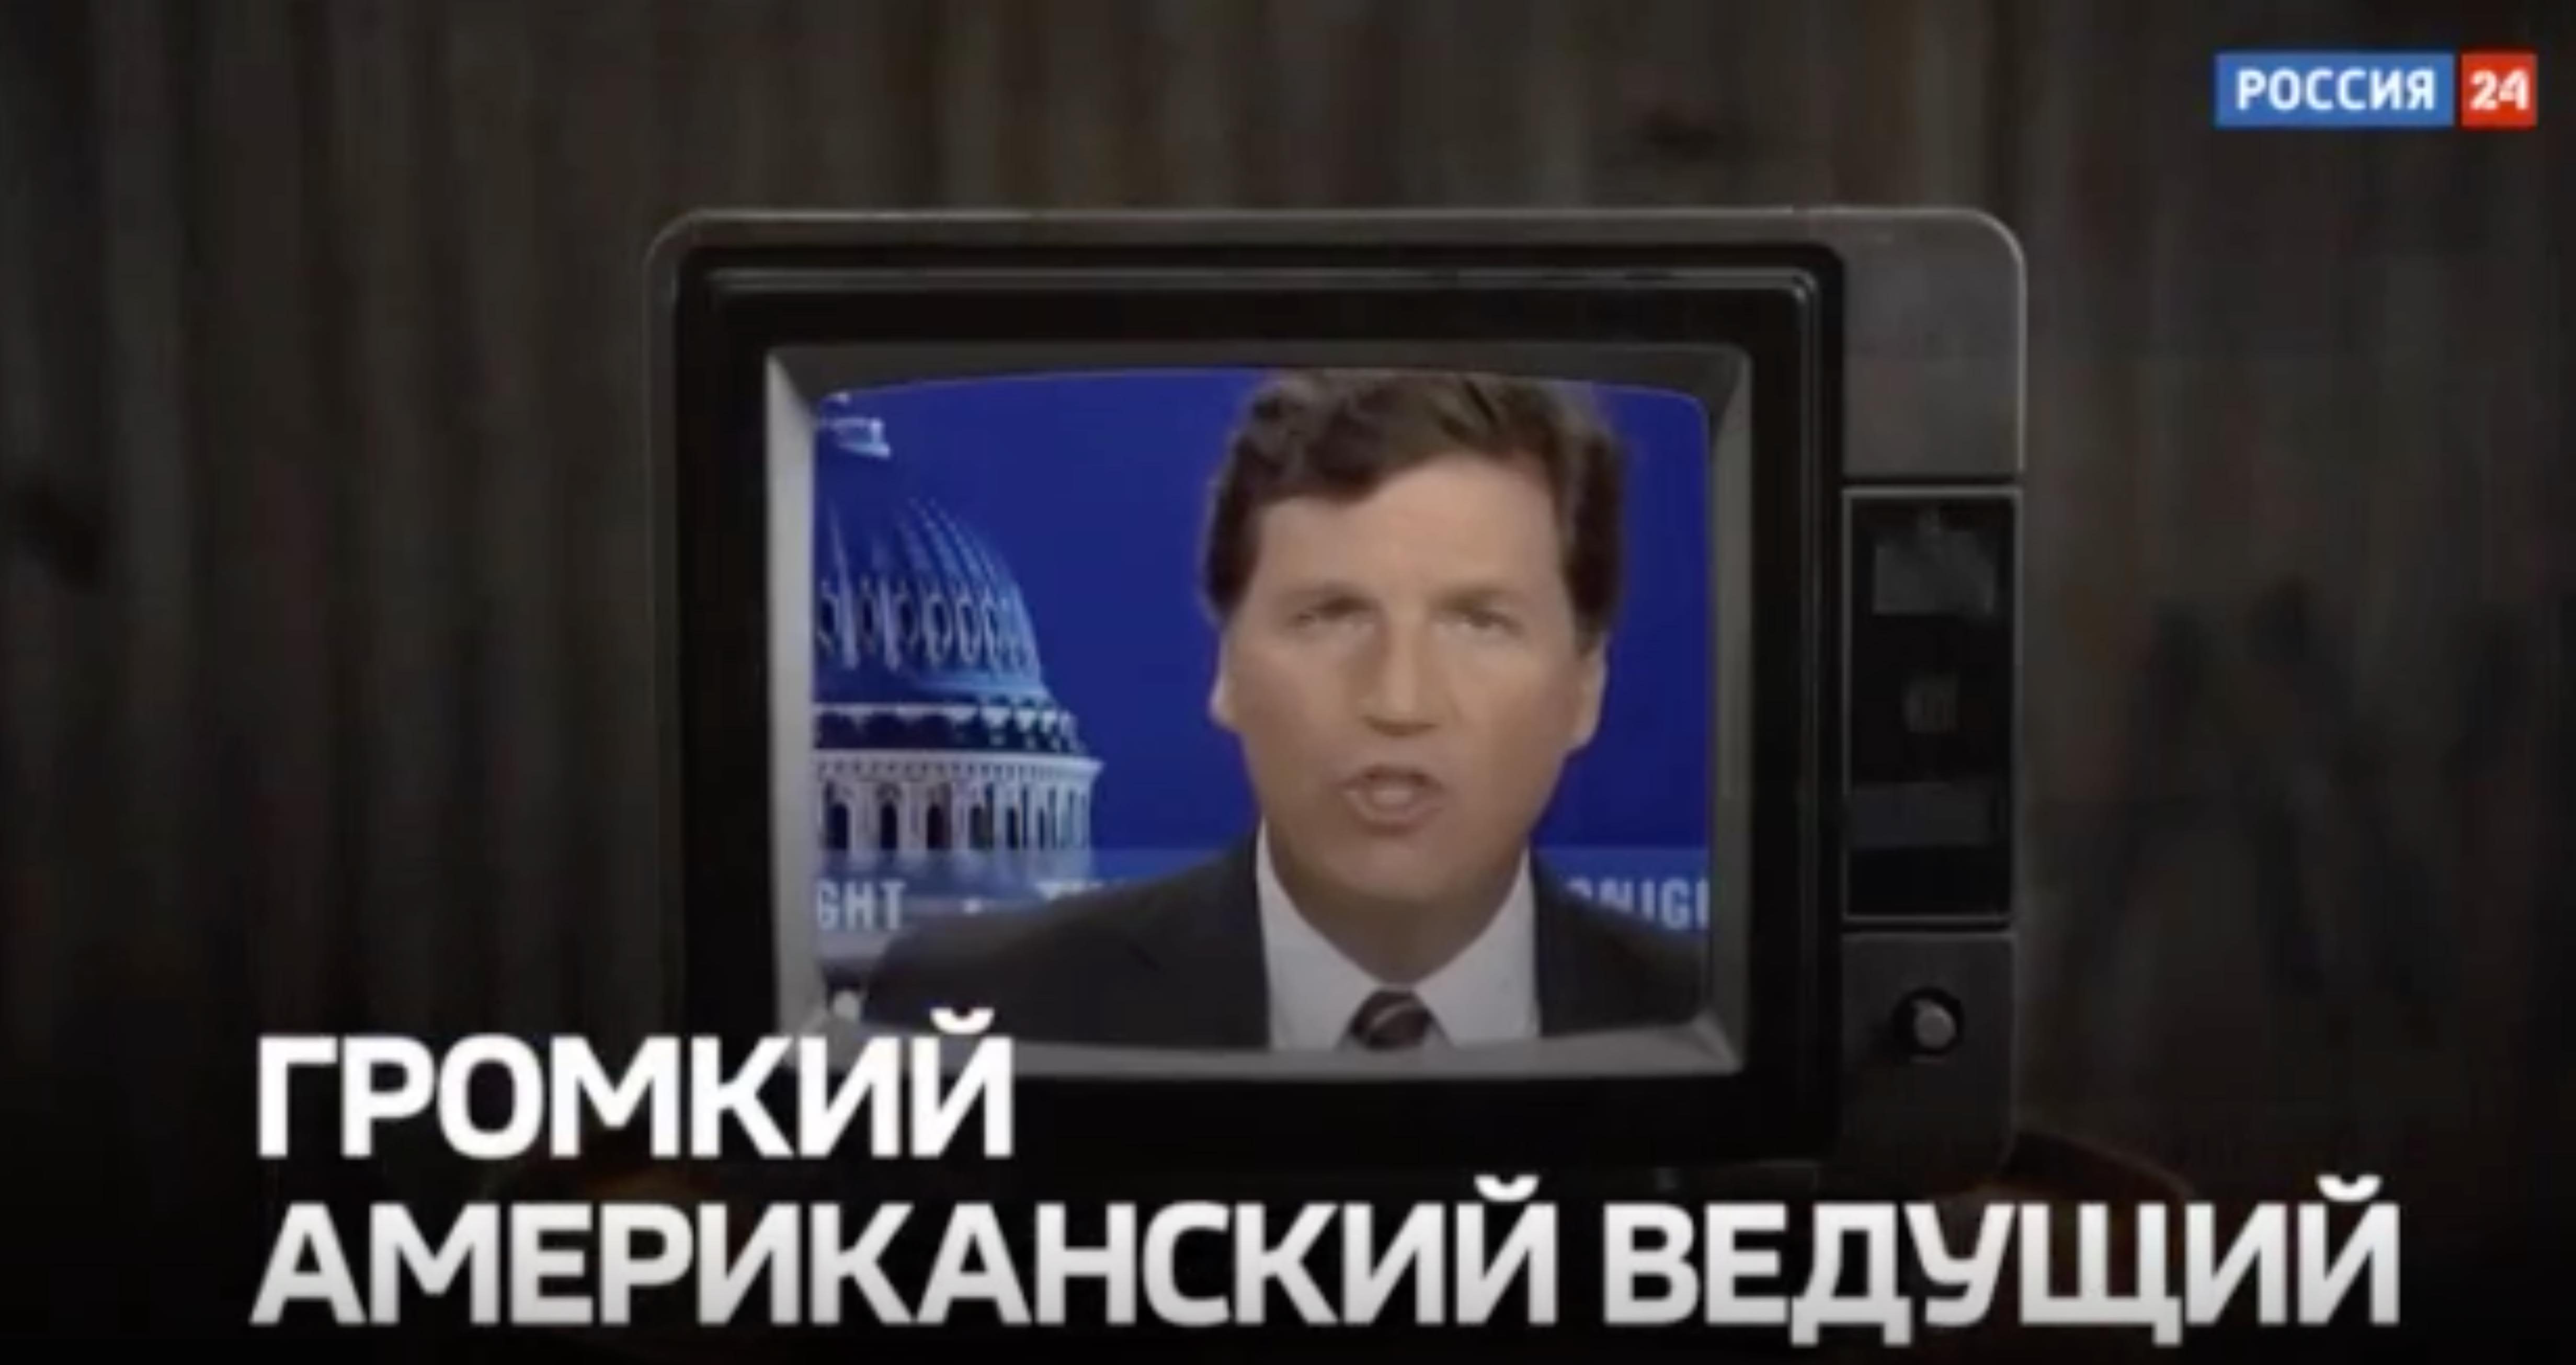 ‘Completely Absurd’: Tucker Carlson Says He Has Nothing to Do With Bizarre Promo Airing on Russian TV